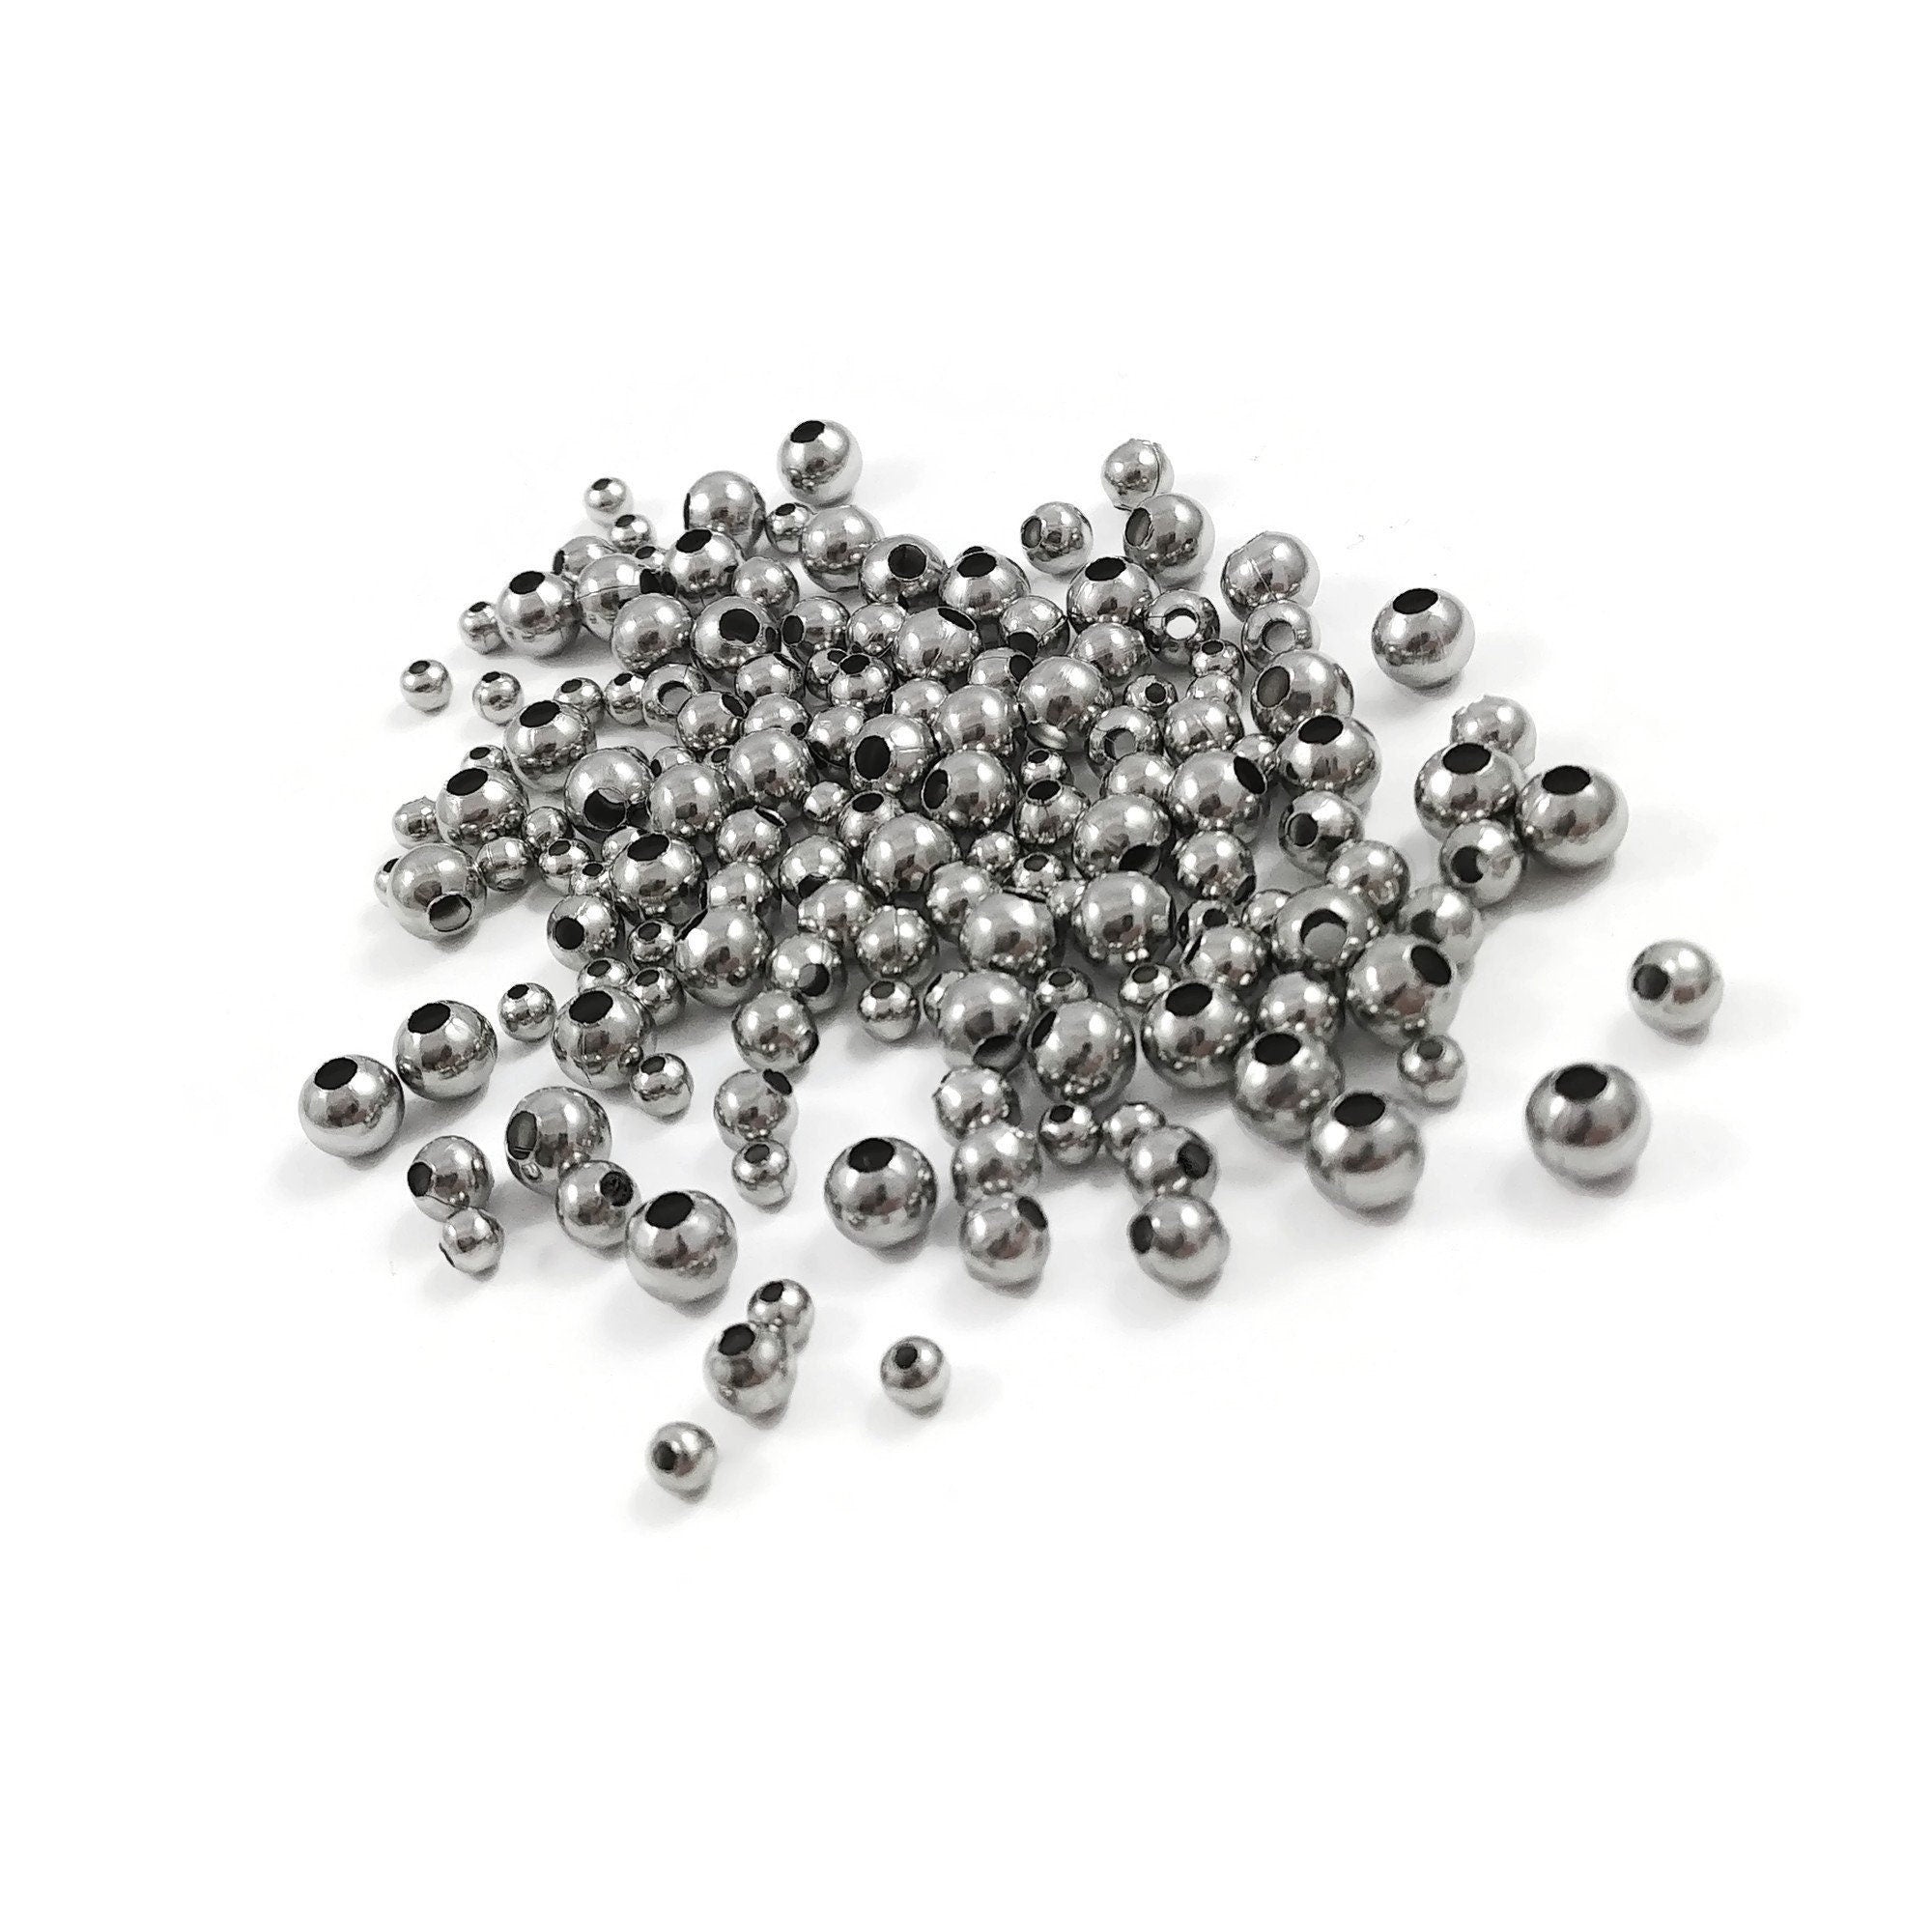 925 Sterling Silver Spacer Beads 36pcs Round Smooth Beads 3mm 4mm